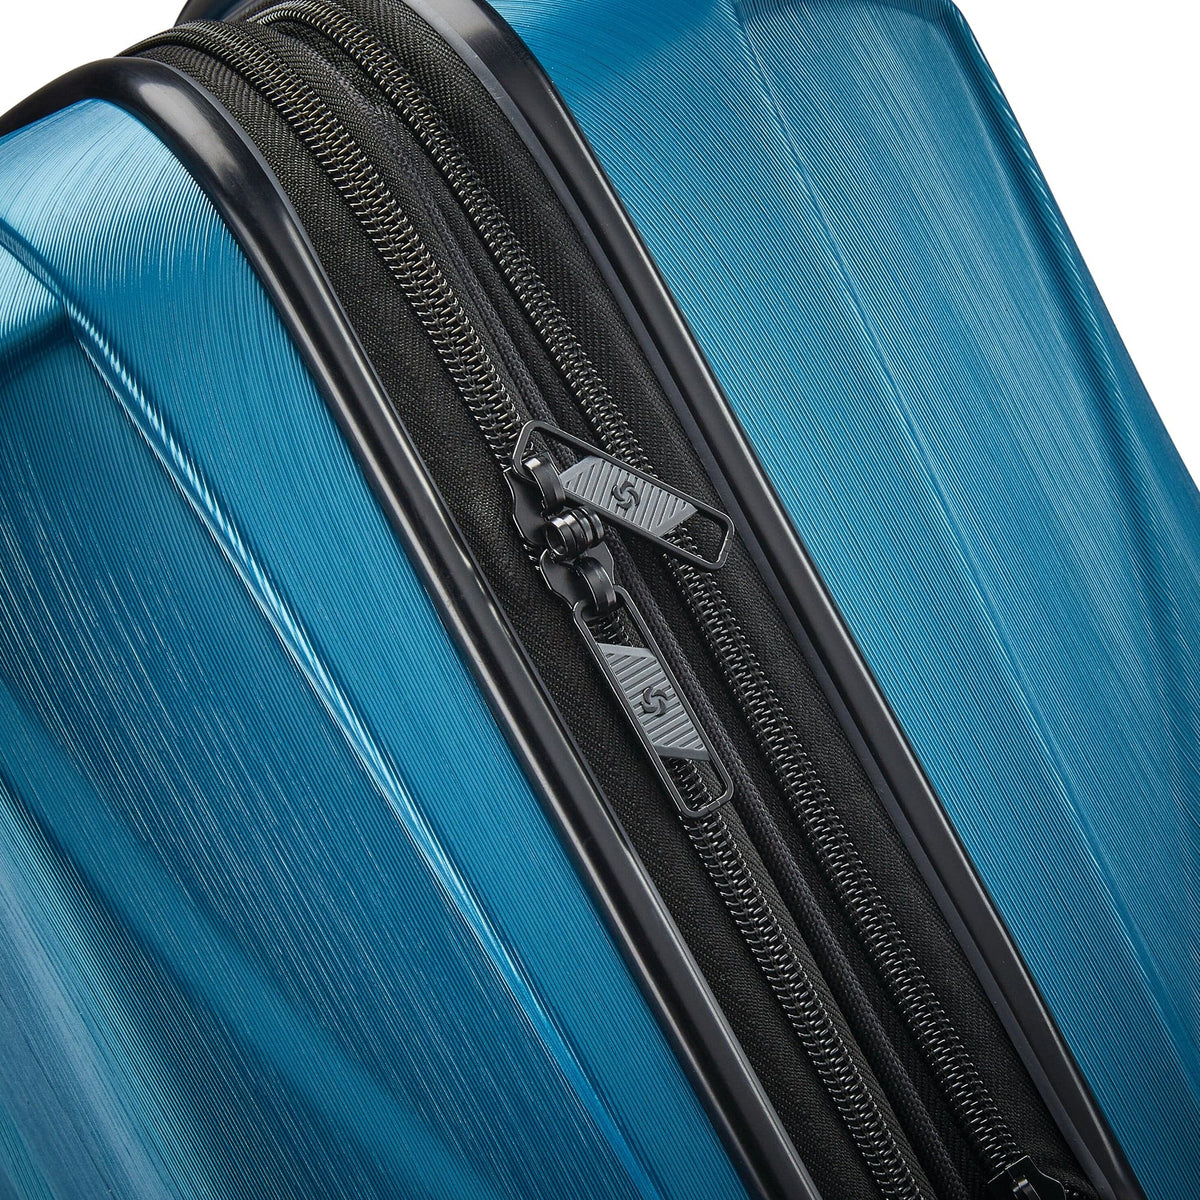 Samsonite Centric 2 Carry-On Spinner Luggage